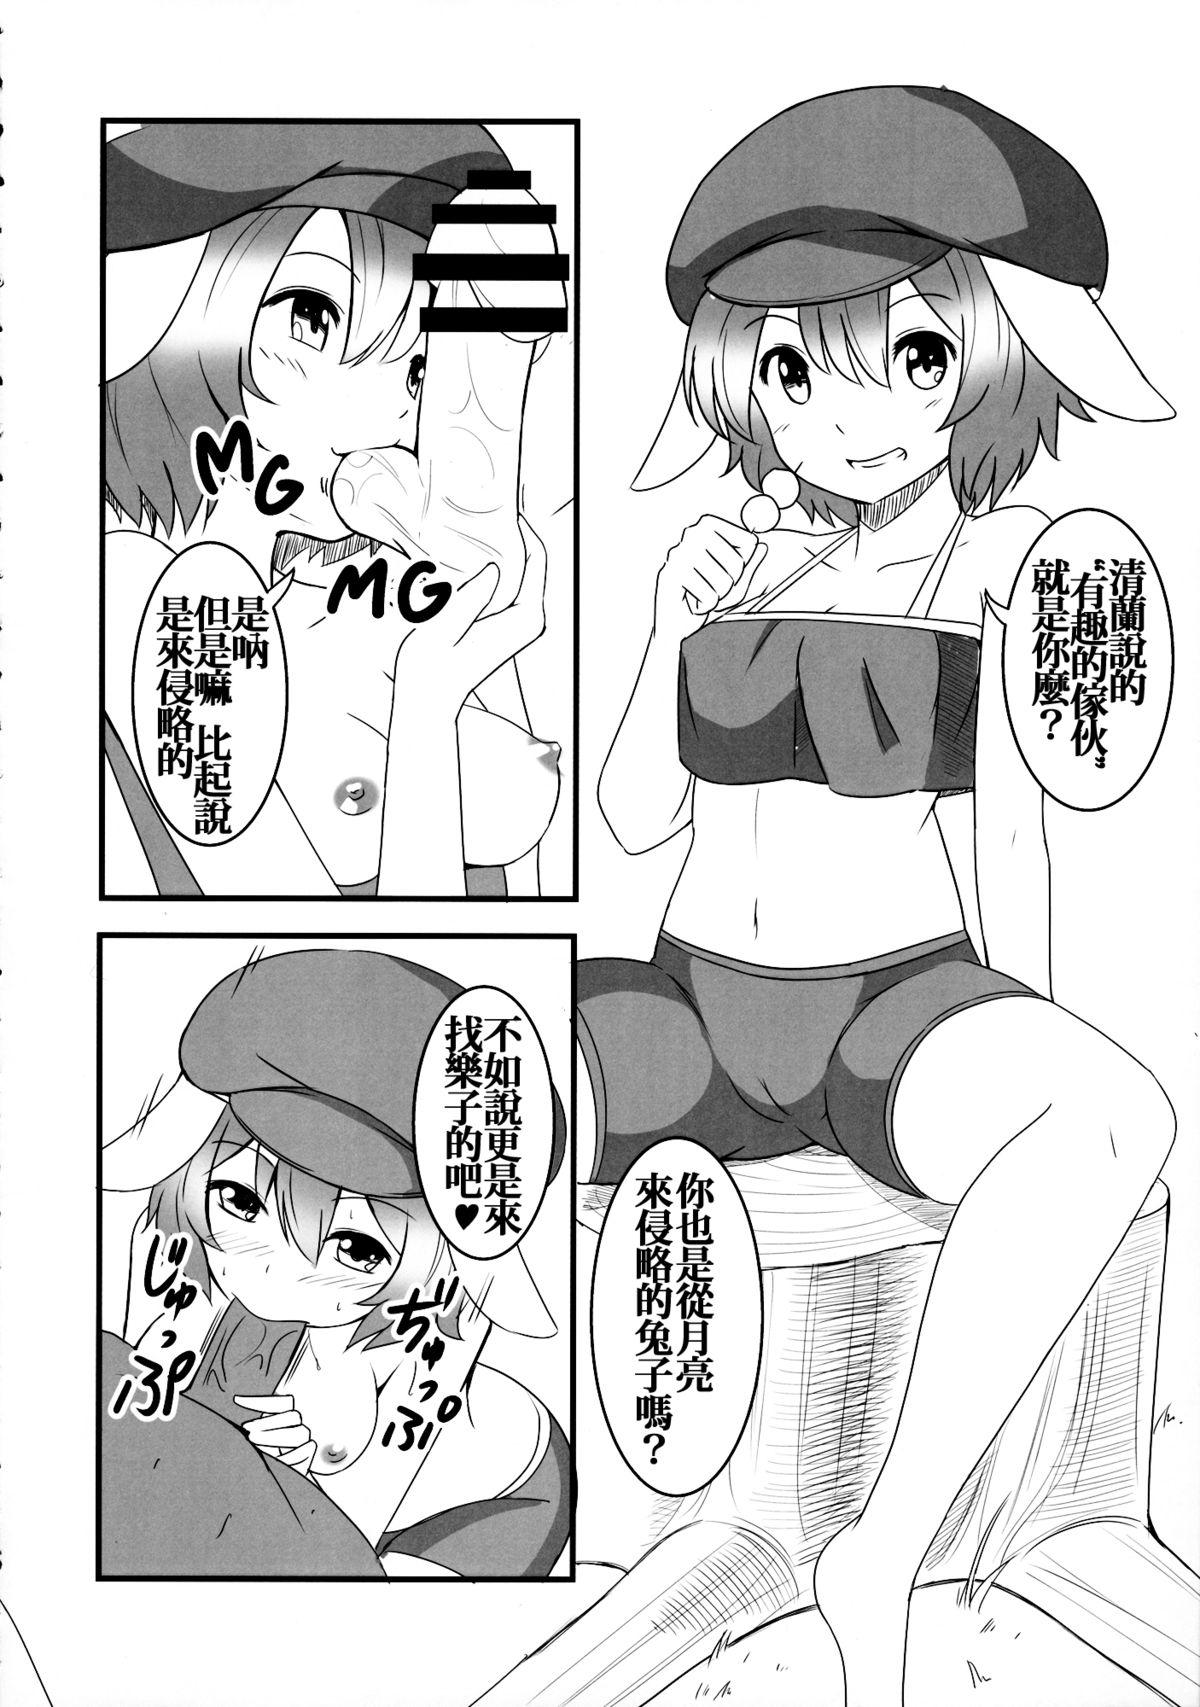 Movie Touhou Kanjuden GT - Touhou project Class Room - Page 8